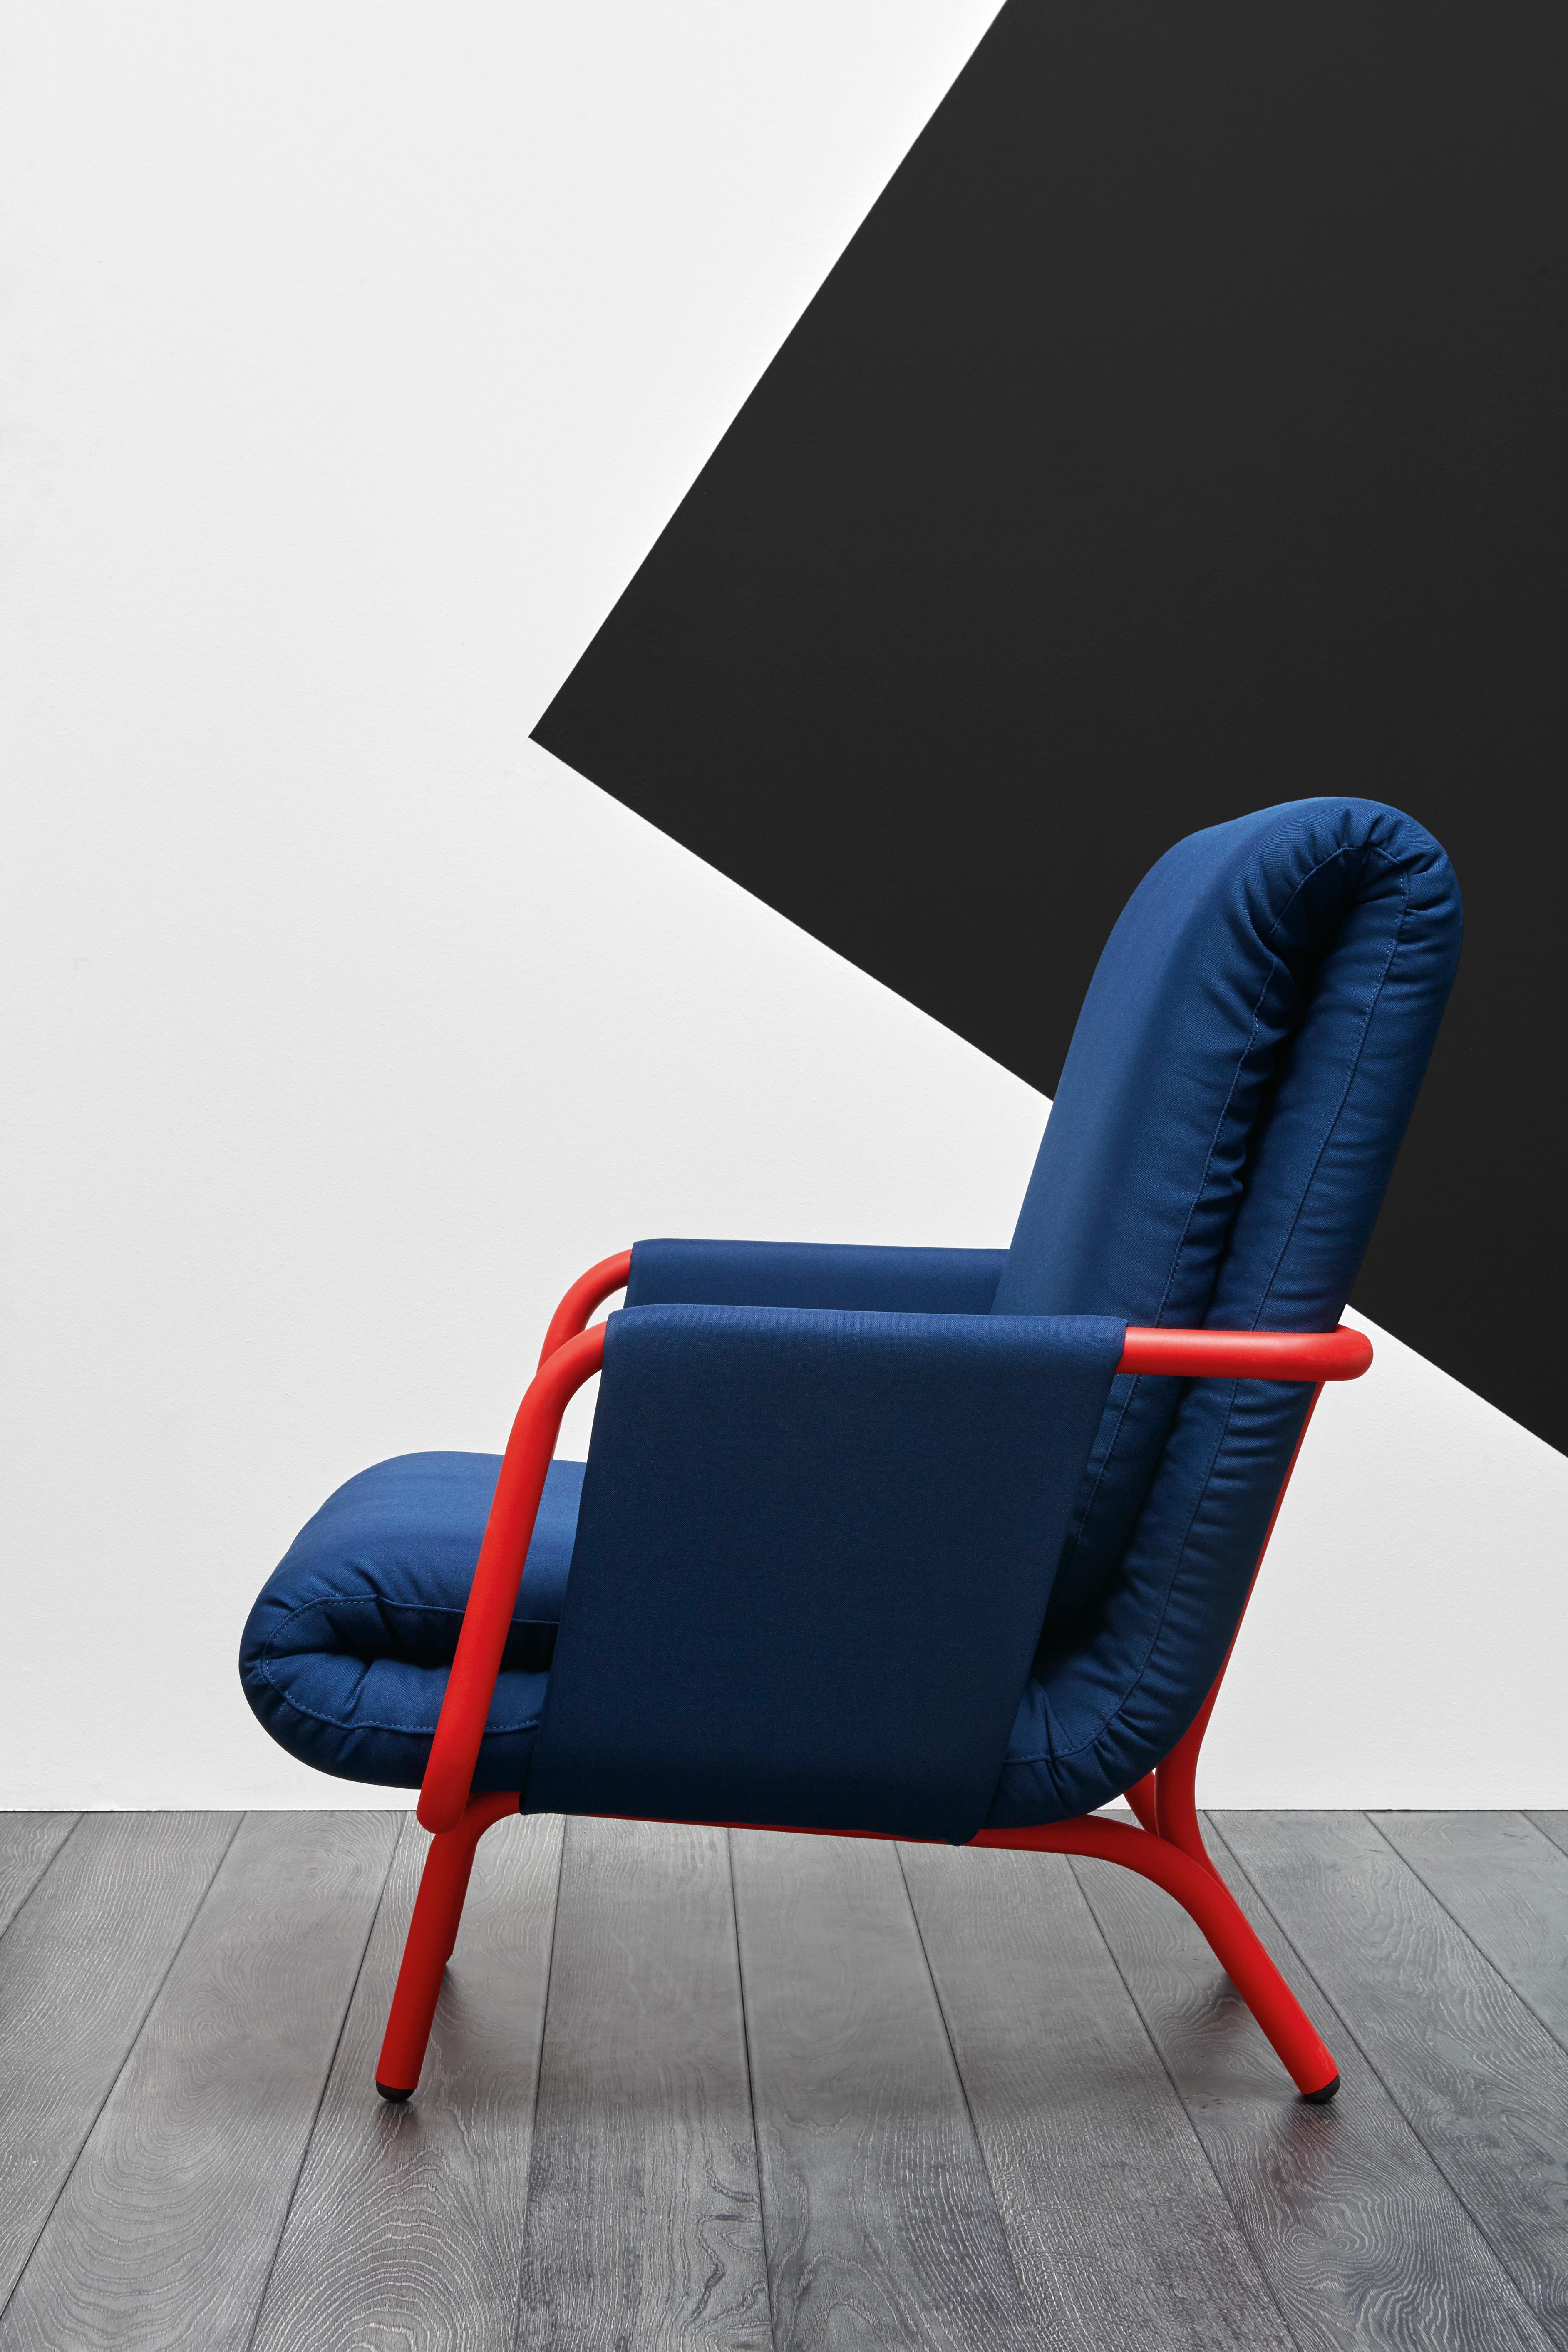 Here you are shown the Diplopia armchair with the Lacquered Red Marsala metal frame and upholstery. The armchair is available for custom orders with a metal frame lacquered in white, silk grey, dusty grey, black or intense blue. The double folded